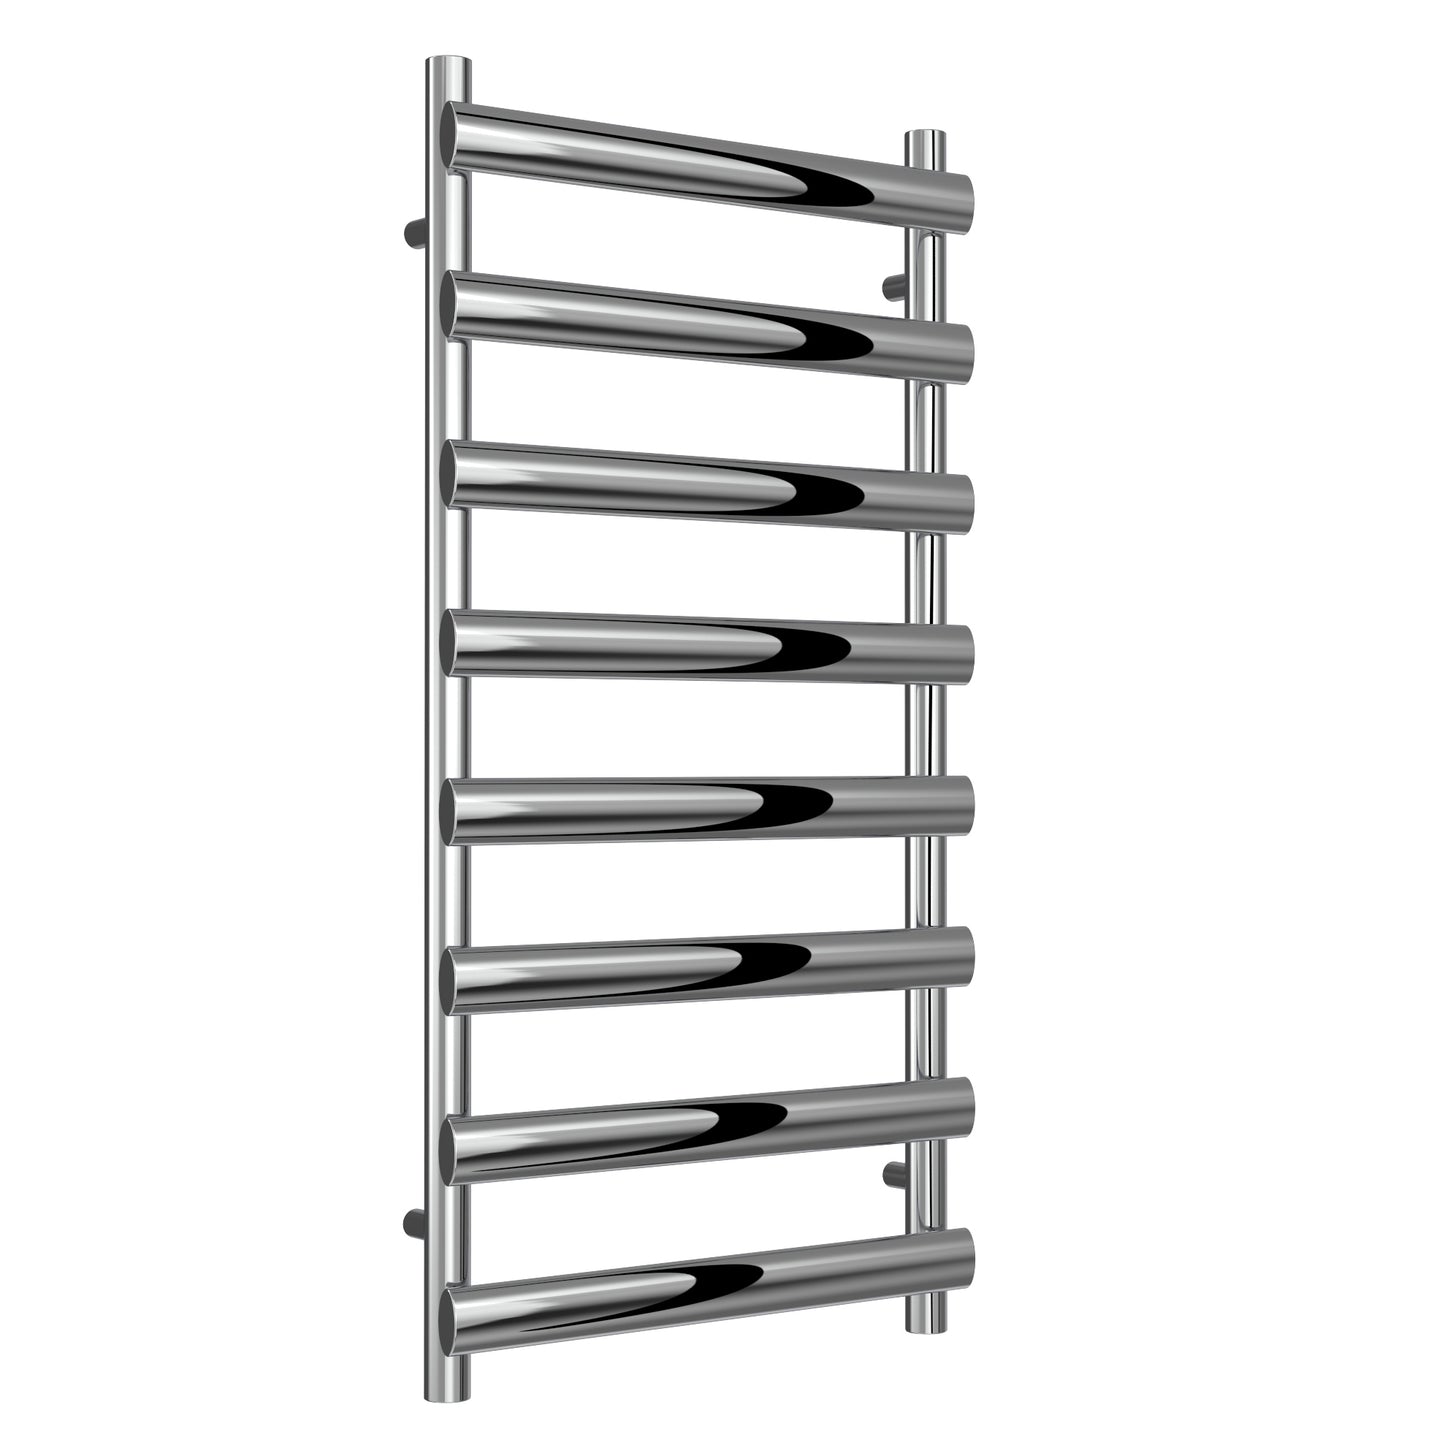 Deno Stainless Steel Heated Towel Rail - Various Sizes - Polished Stainless Steel